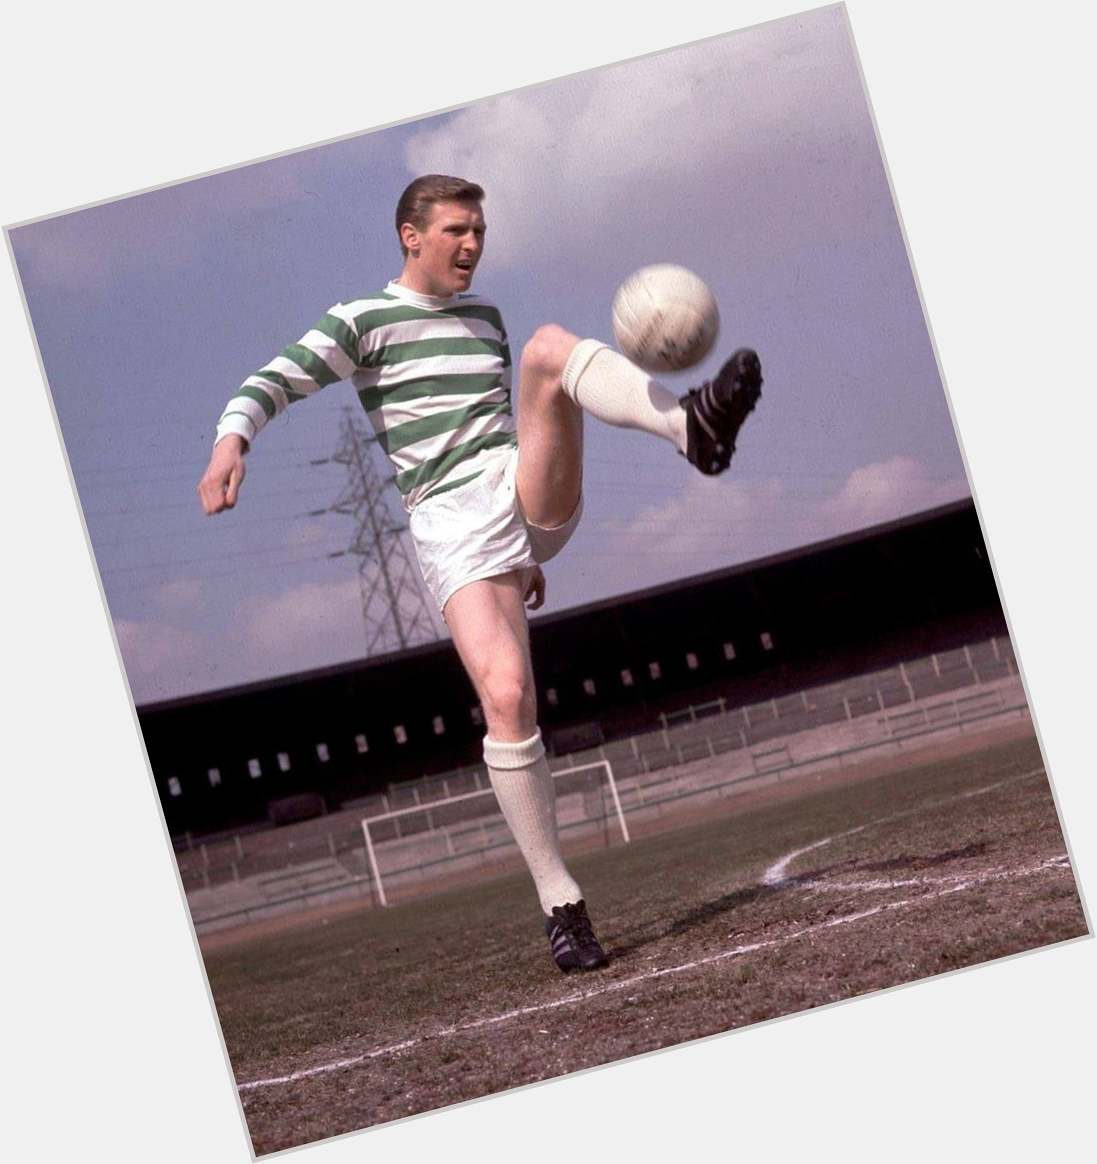 Happy 82nd Birthday to Billy McNeill.
A legend, a gentleman, and an inspiration. In a class by himself. R.I.P,   